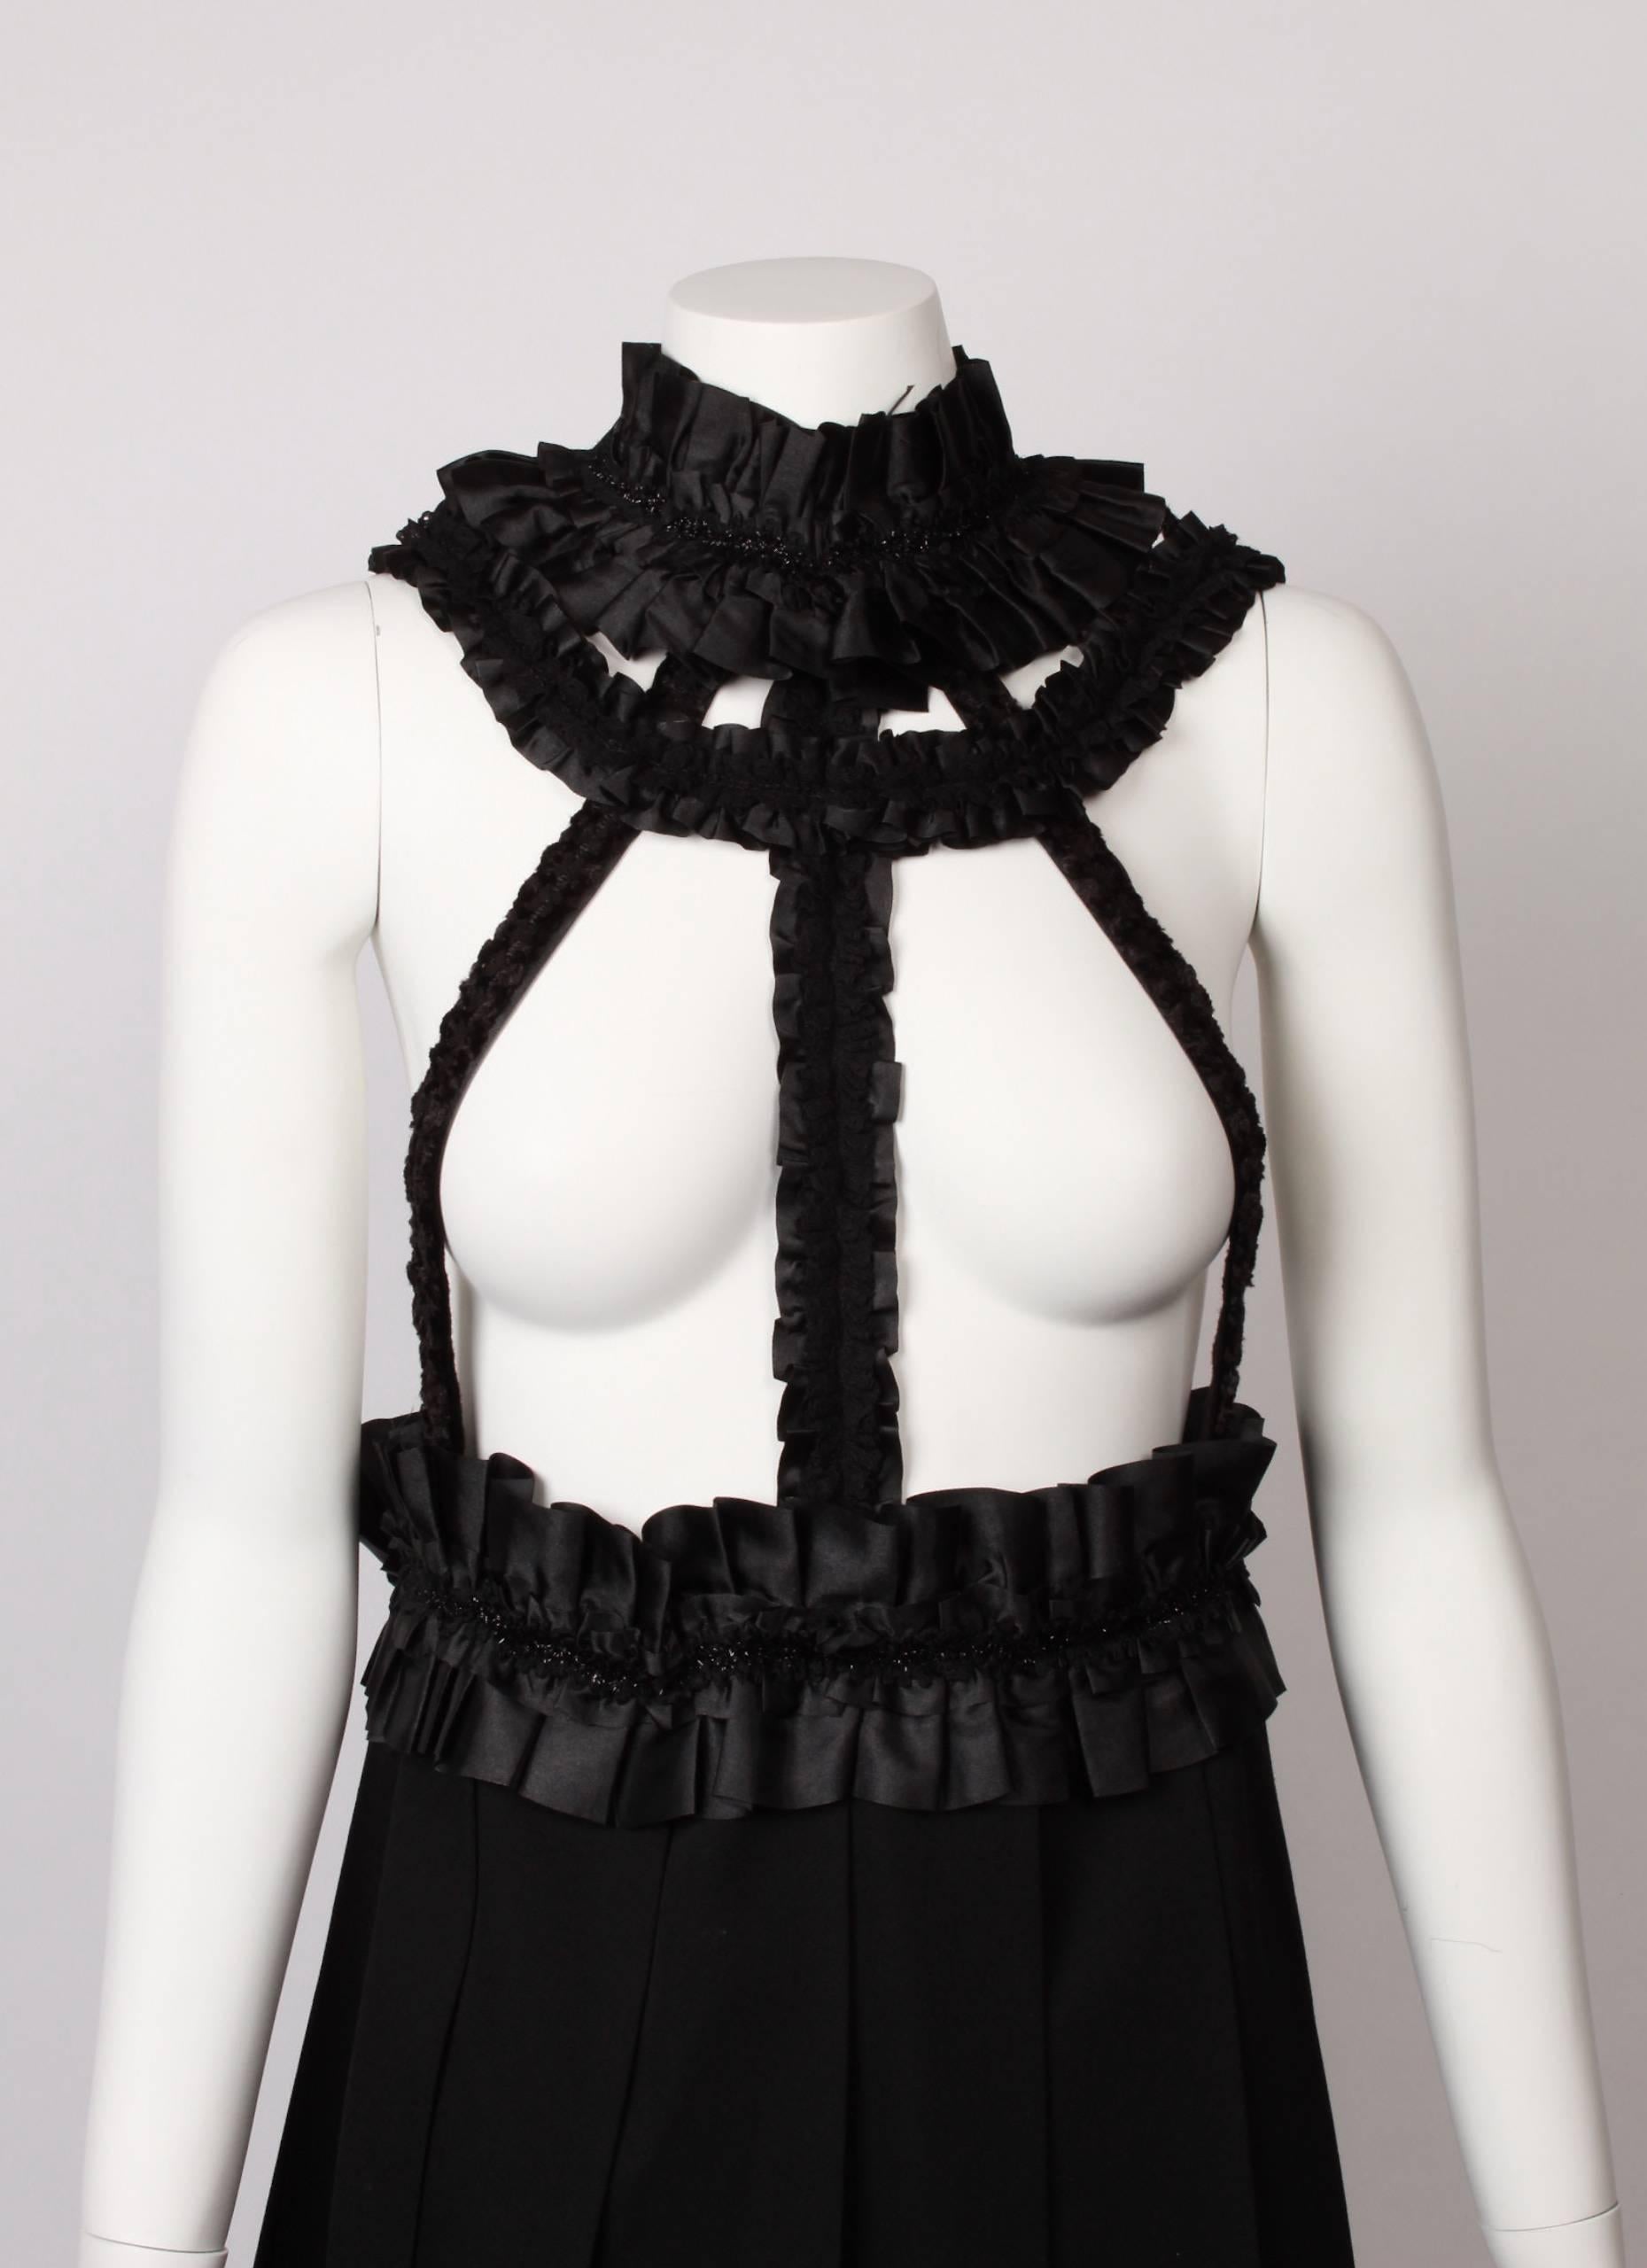 COMME DES GARCONS Evening Pinafore with satin and lace pleated and ruffled decorative straps.
Waistline and neckline feature black lurex strips.
Skirt has wide knife pleats in wool gaberdine. Pleats sit on a slight angle.
From the 2008 Collection.